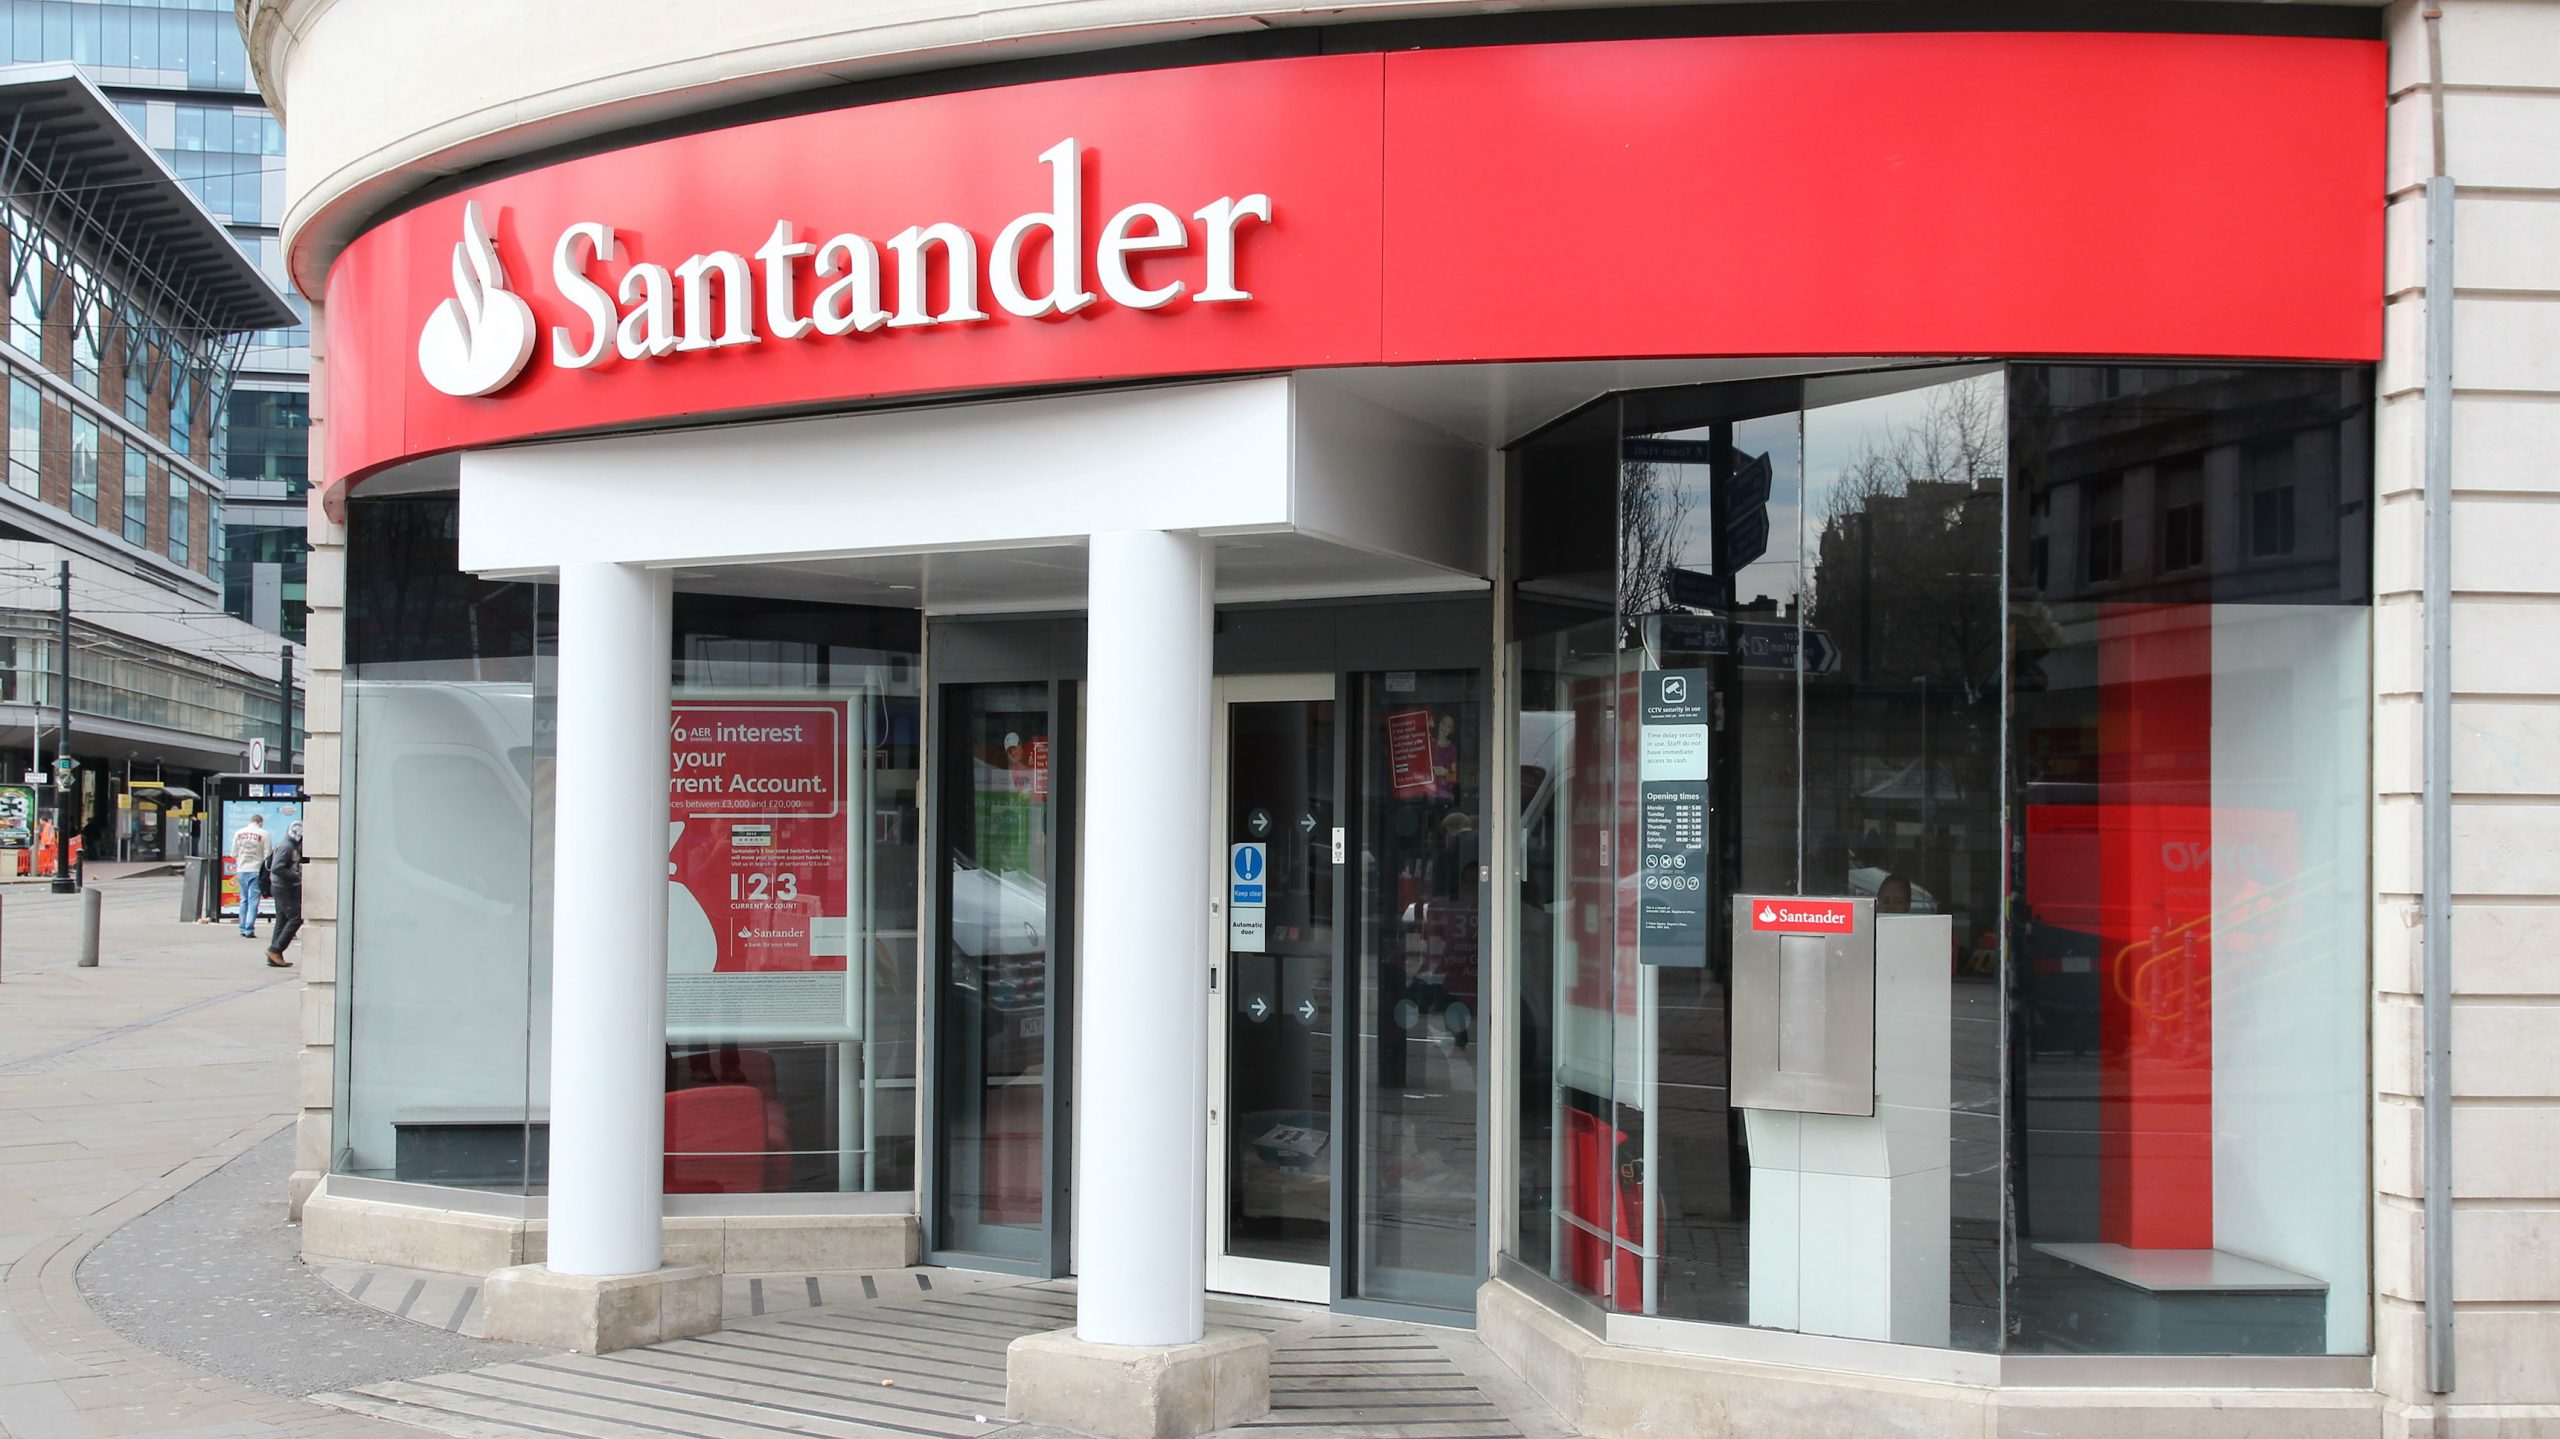 Cyberattack at Santander bank in Spain after company detects ‘unauthorised access’ to client database [Video]